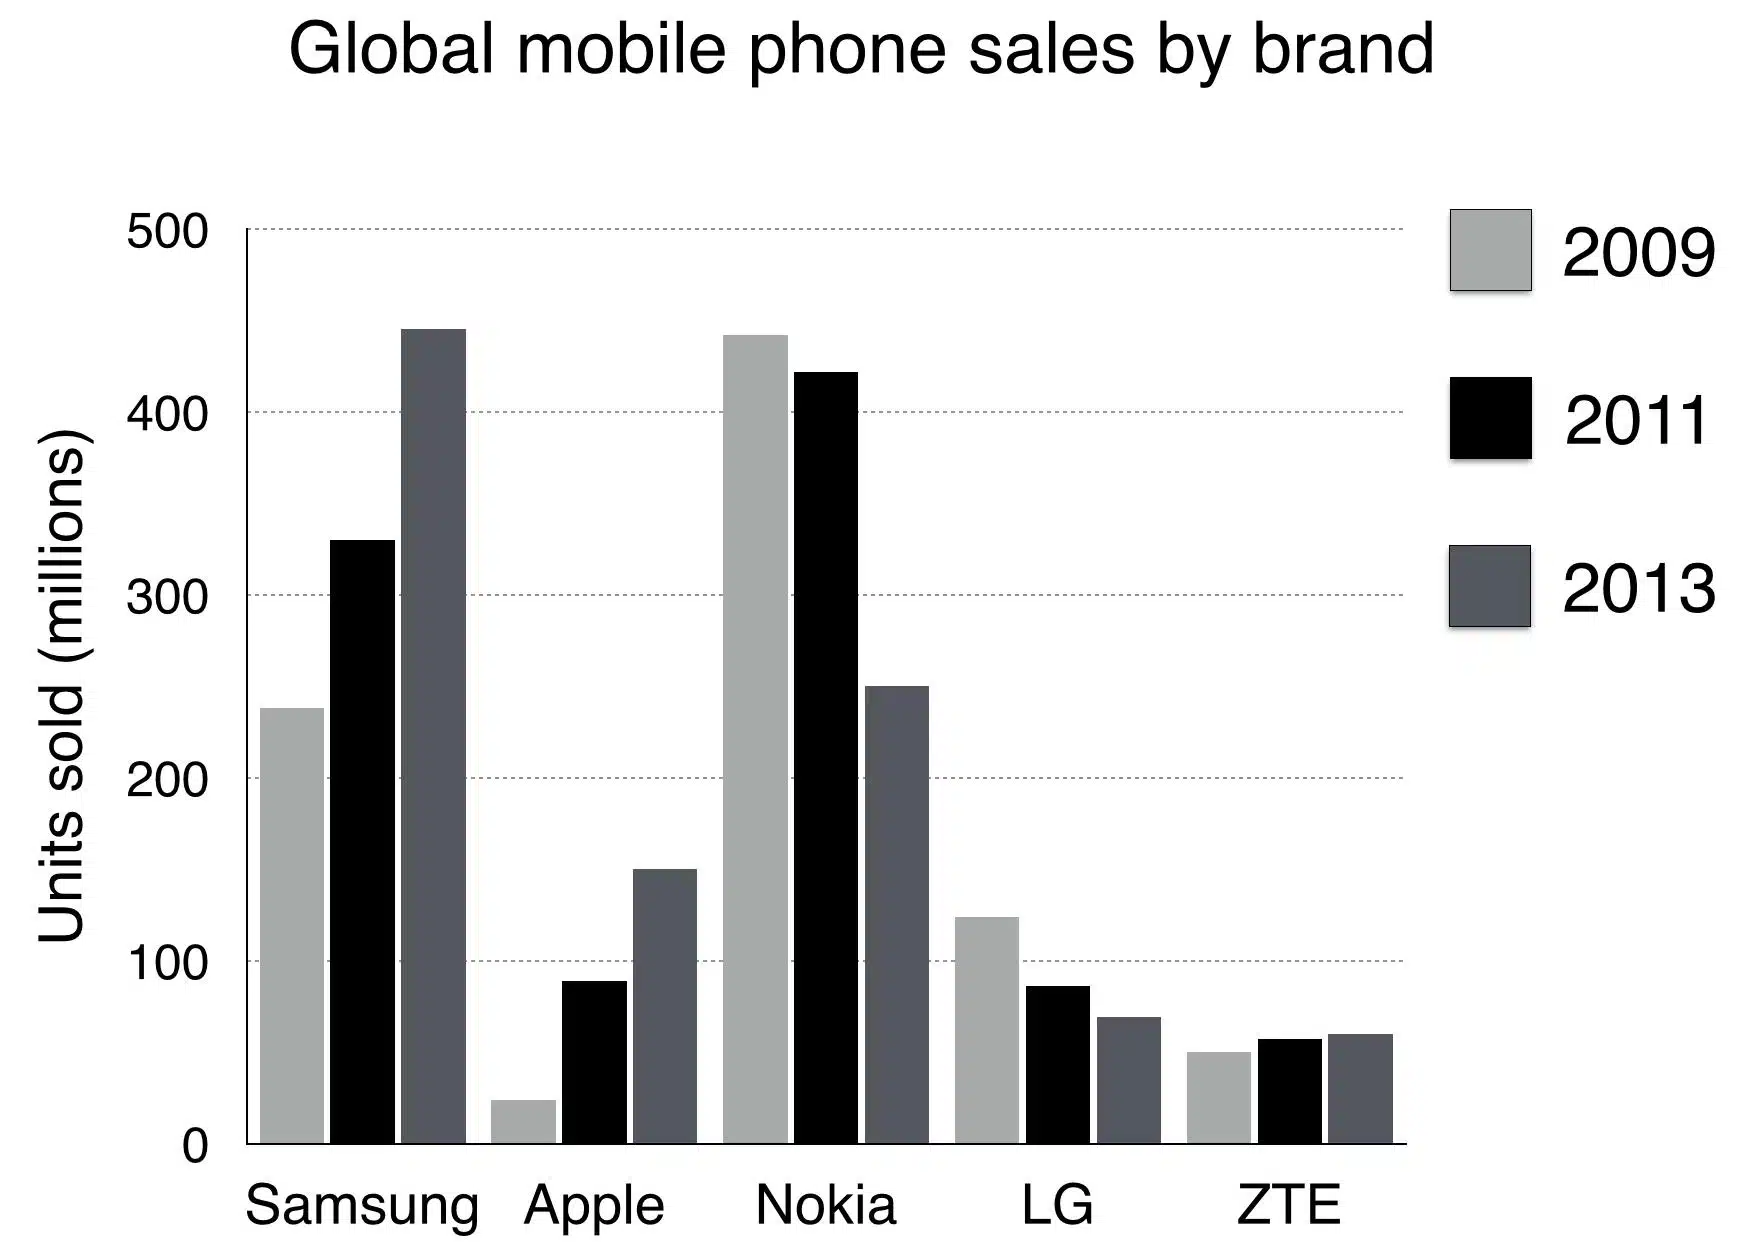 IELTS writing bar chart global mobile phone sales by brand